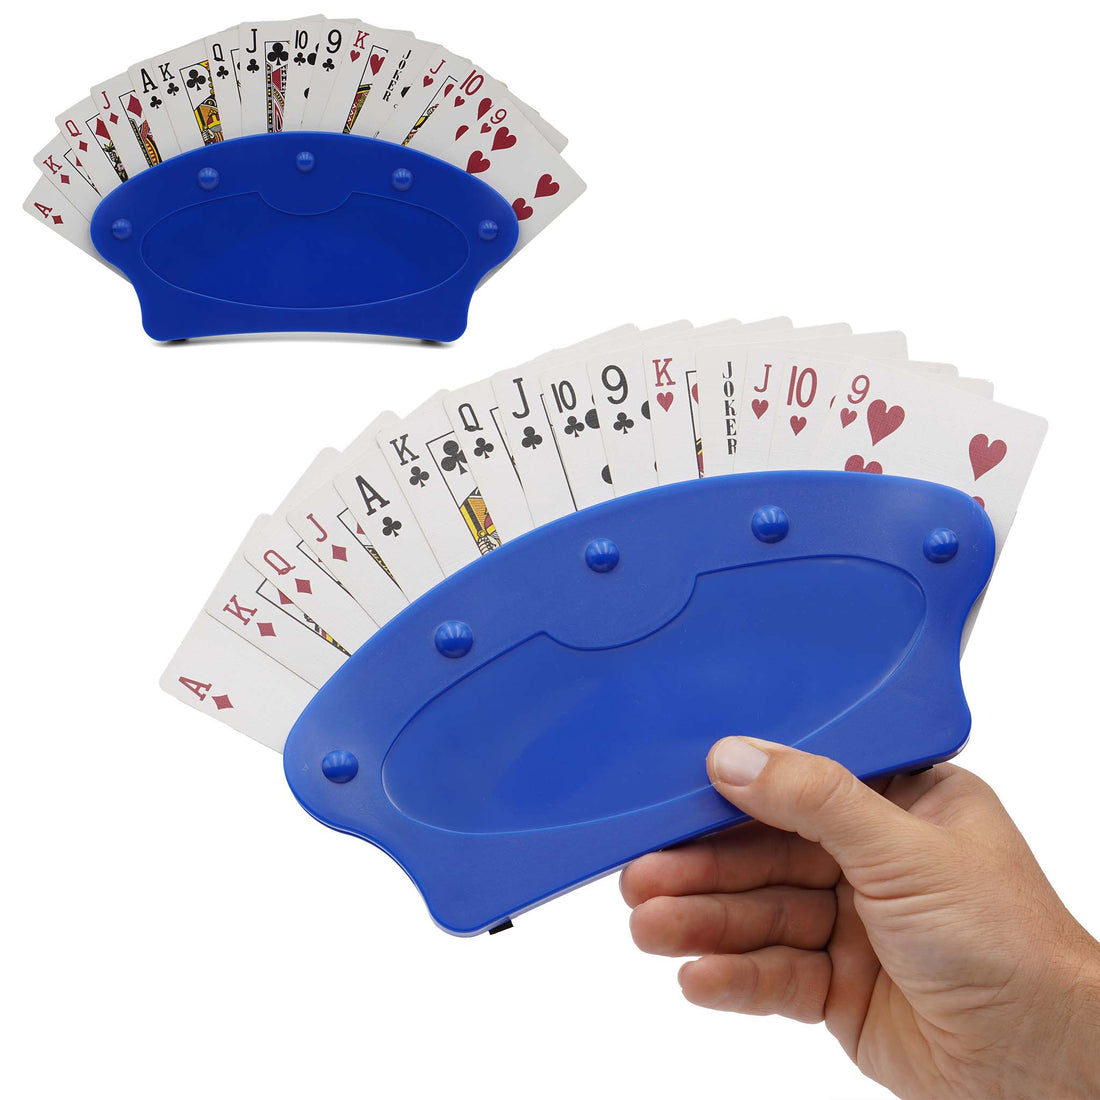 picture of two playing card holders. one is standing and one is being held in a hand